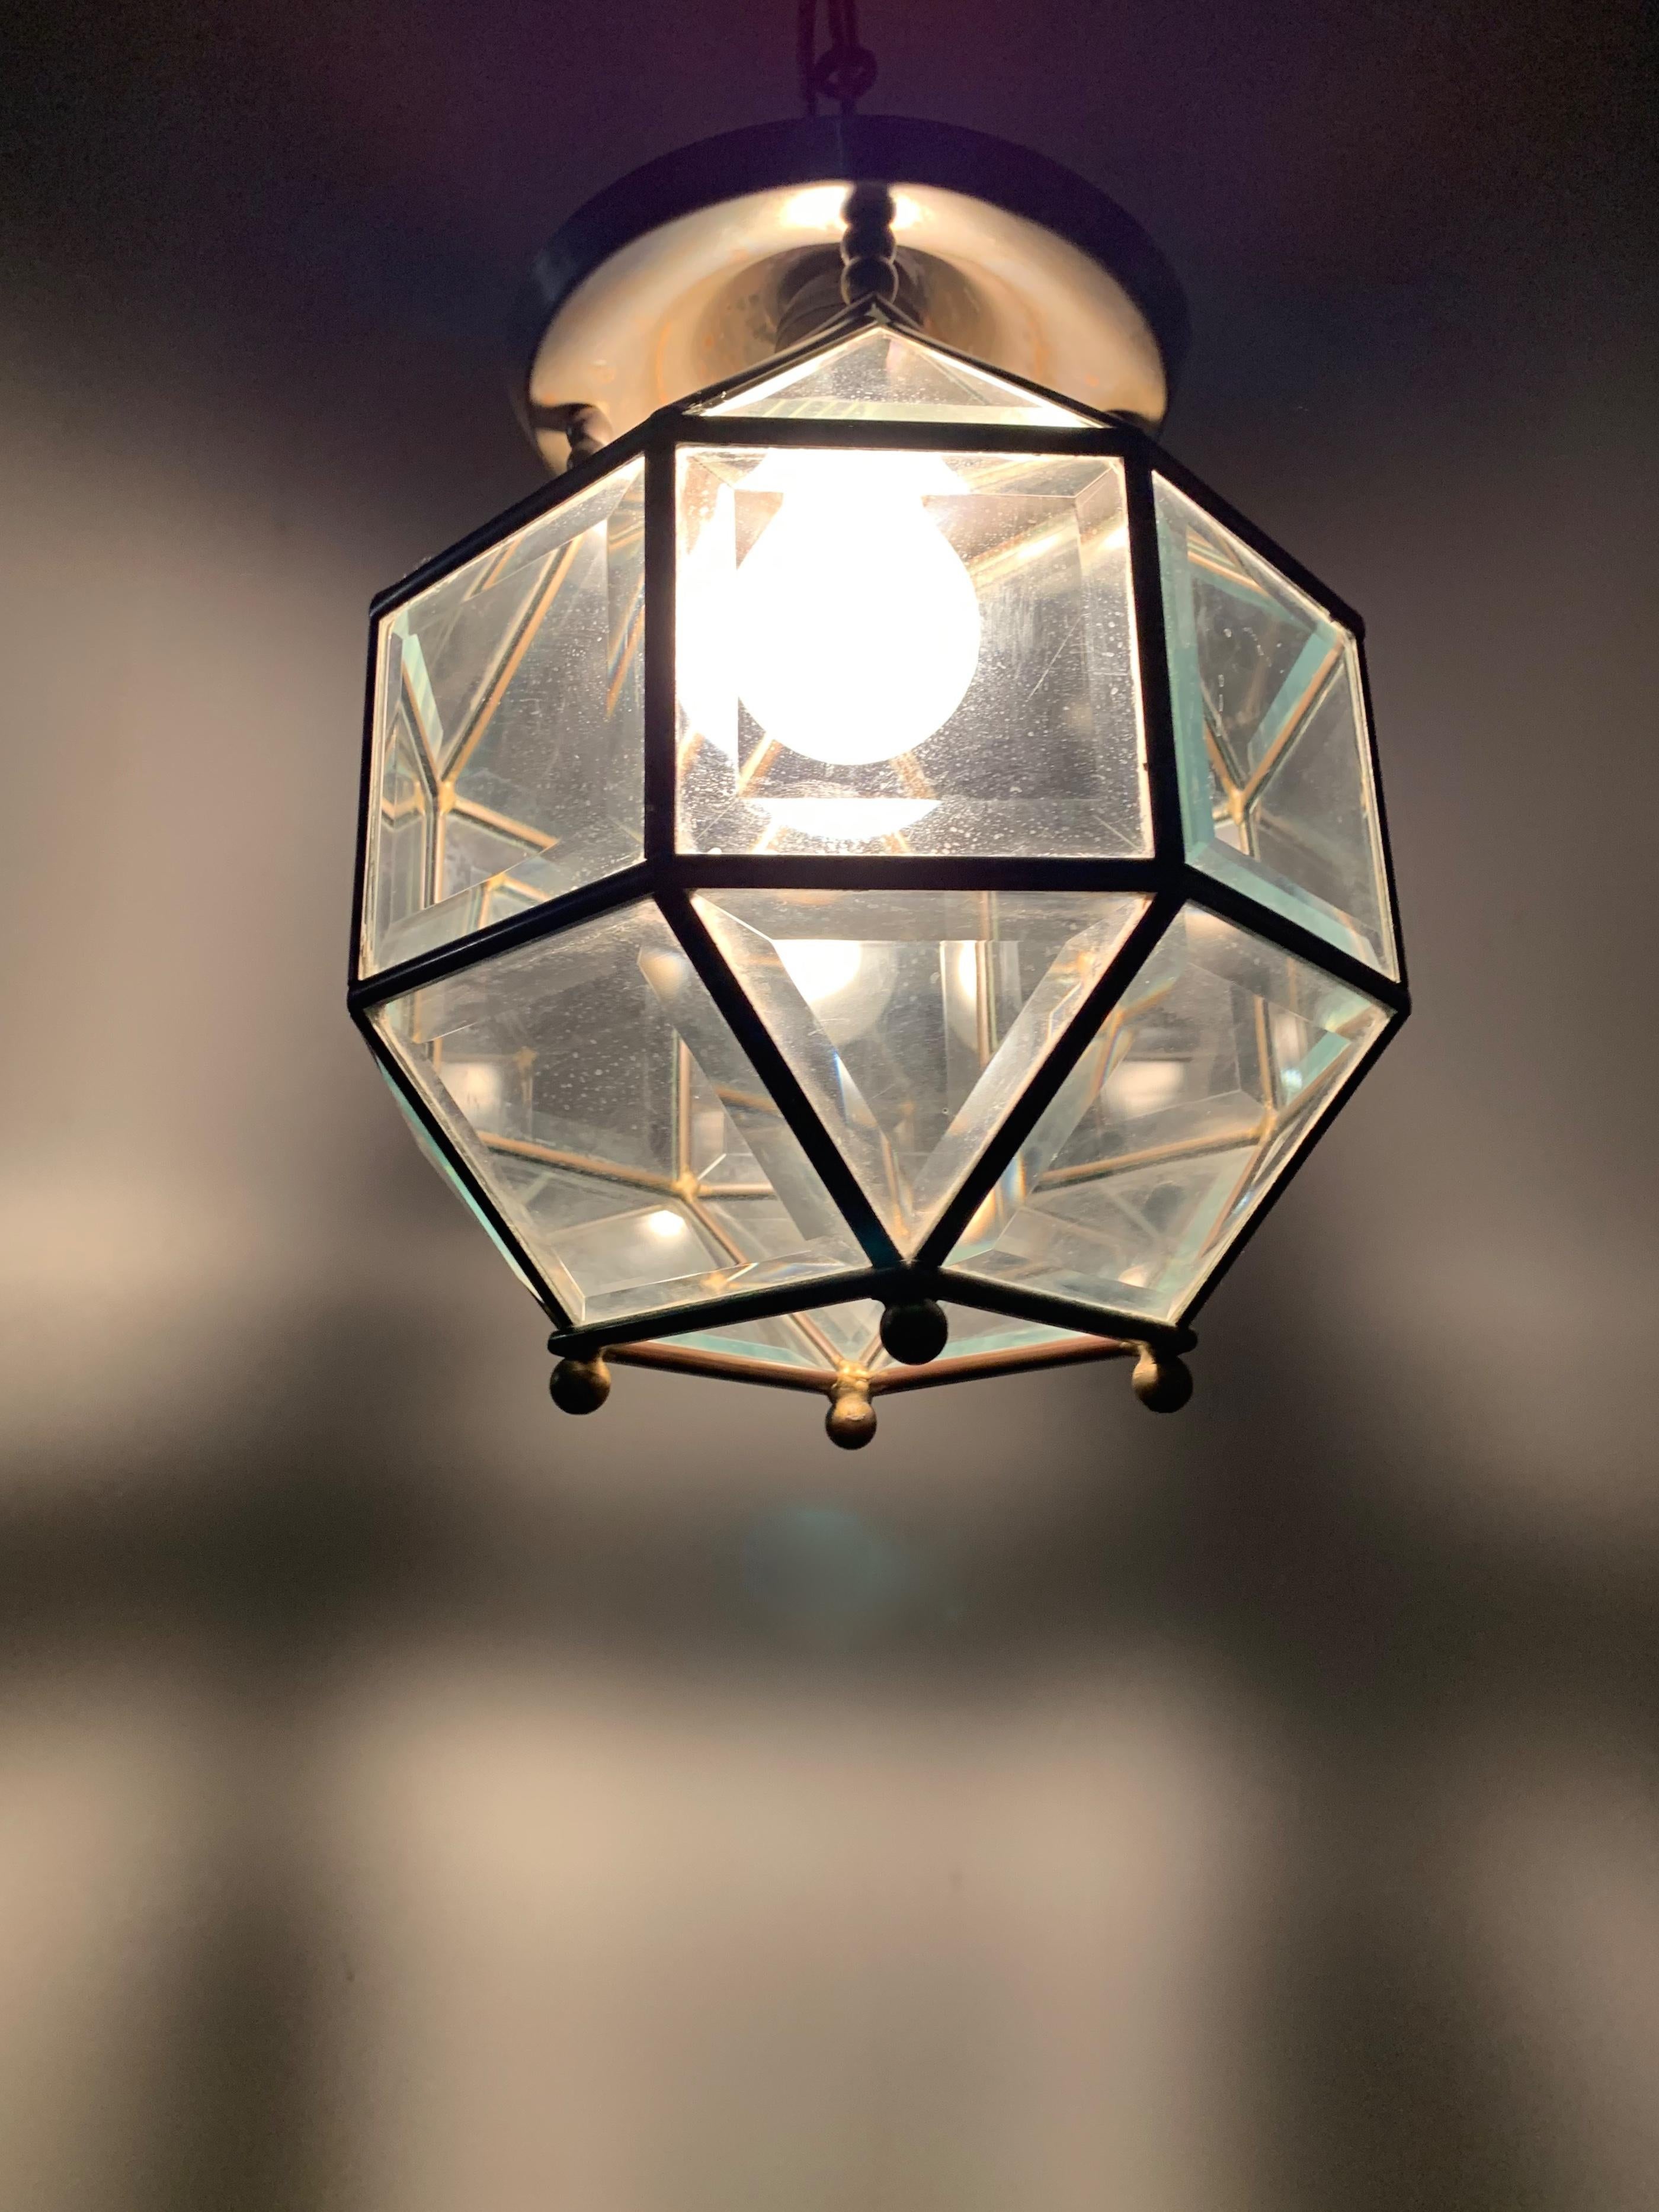 European Early 1900s Beveled Glass and Brass Pendant Cubic Adolf Loos Style Ceiling Light